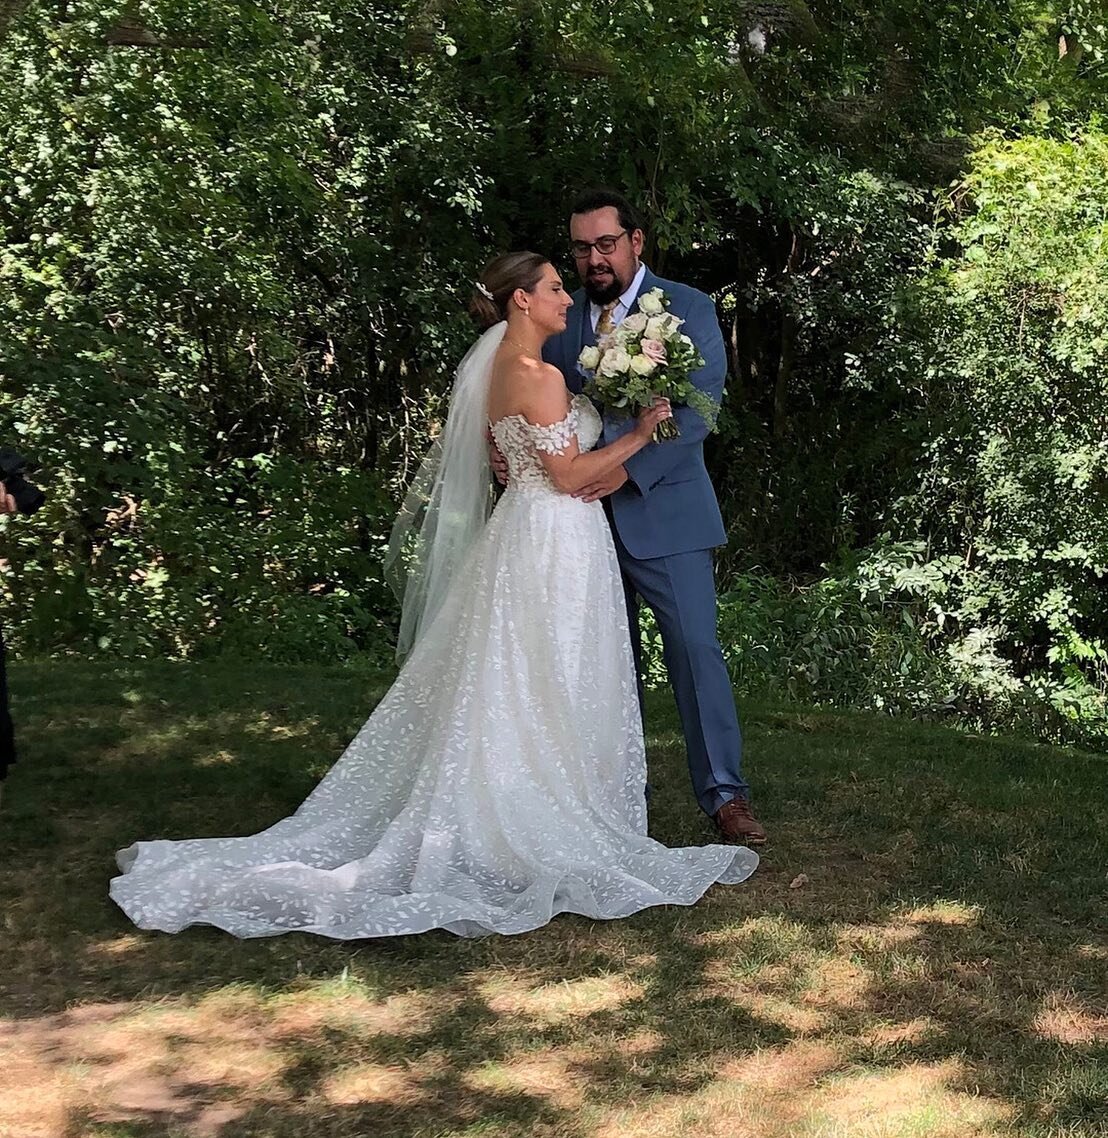 My son Everett McMillen Cislo married Jessie Courtade on July 30th. This photo is a higher resolution. It was a wonderful day full of joy and love.
⠀⠀⠀⠀⠀⠀⠀⠀⠀
@emcislo67 @courtessio 
⠀⠀⠀⠀⠀⠀⠀⠀⠀
#creativeenergy #campmichigania #artistlife #abstractart  